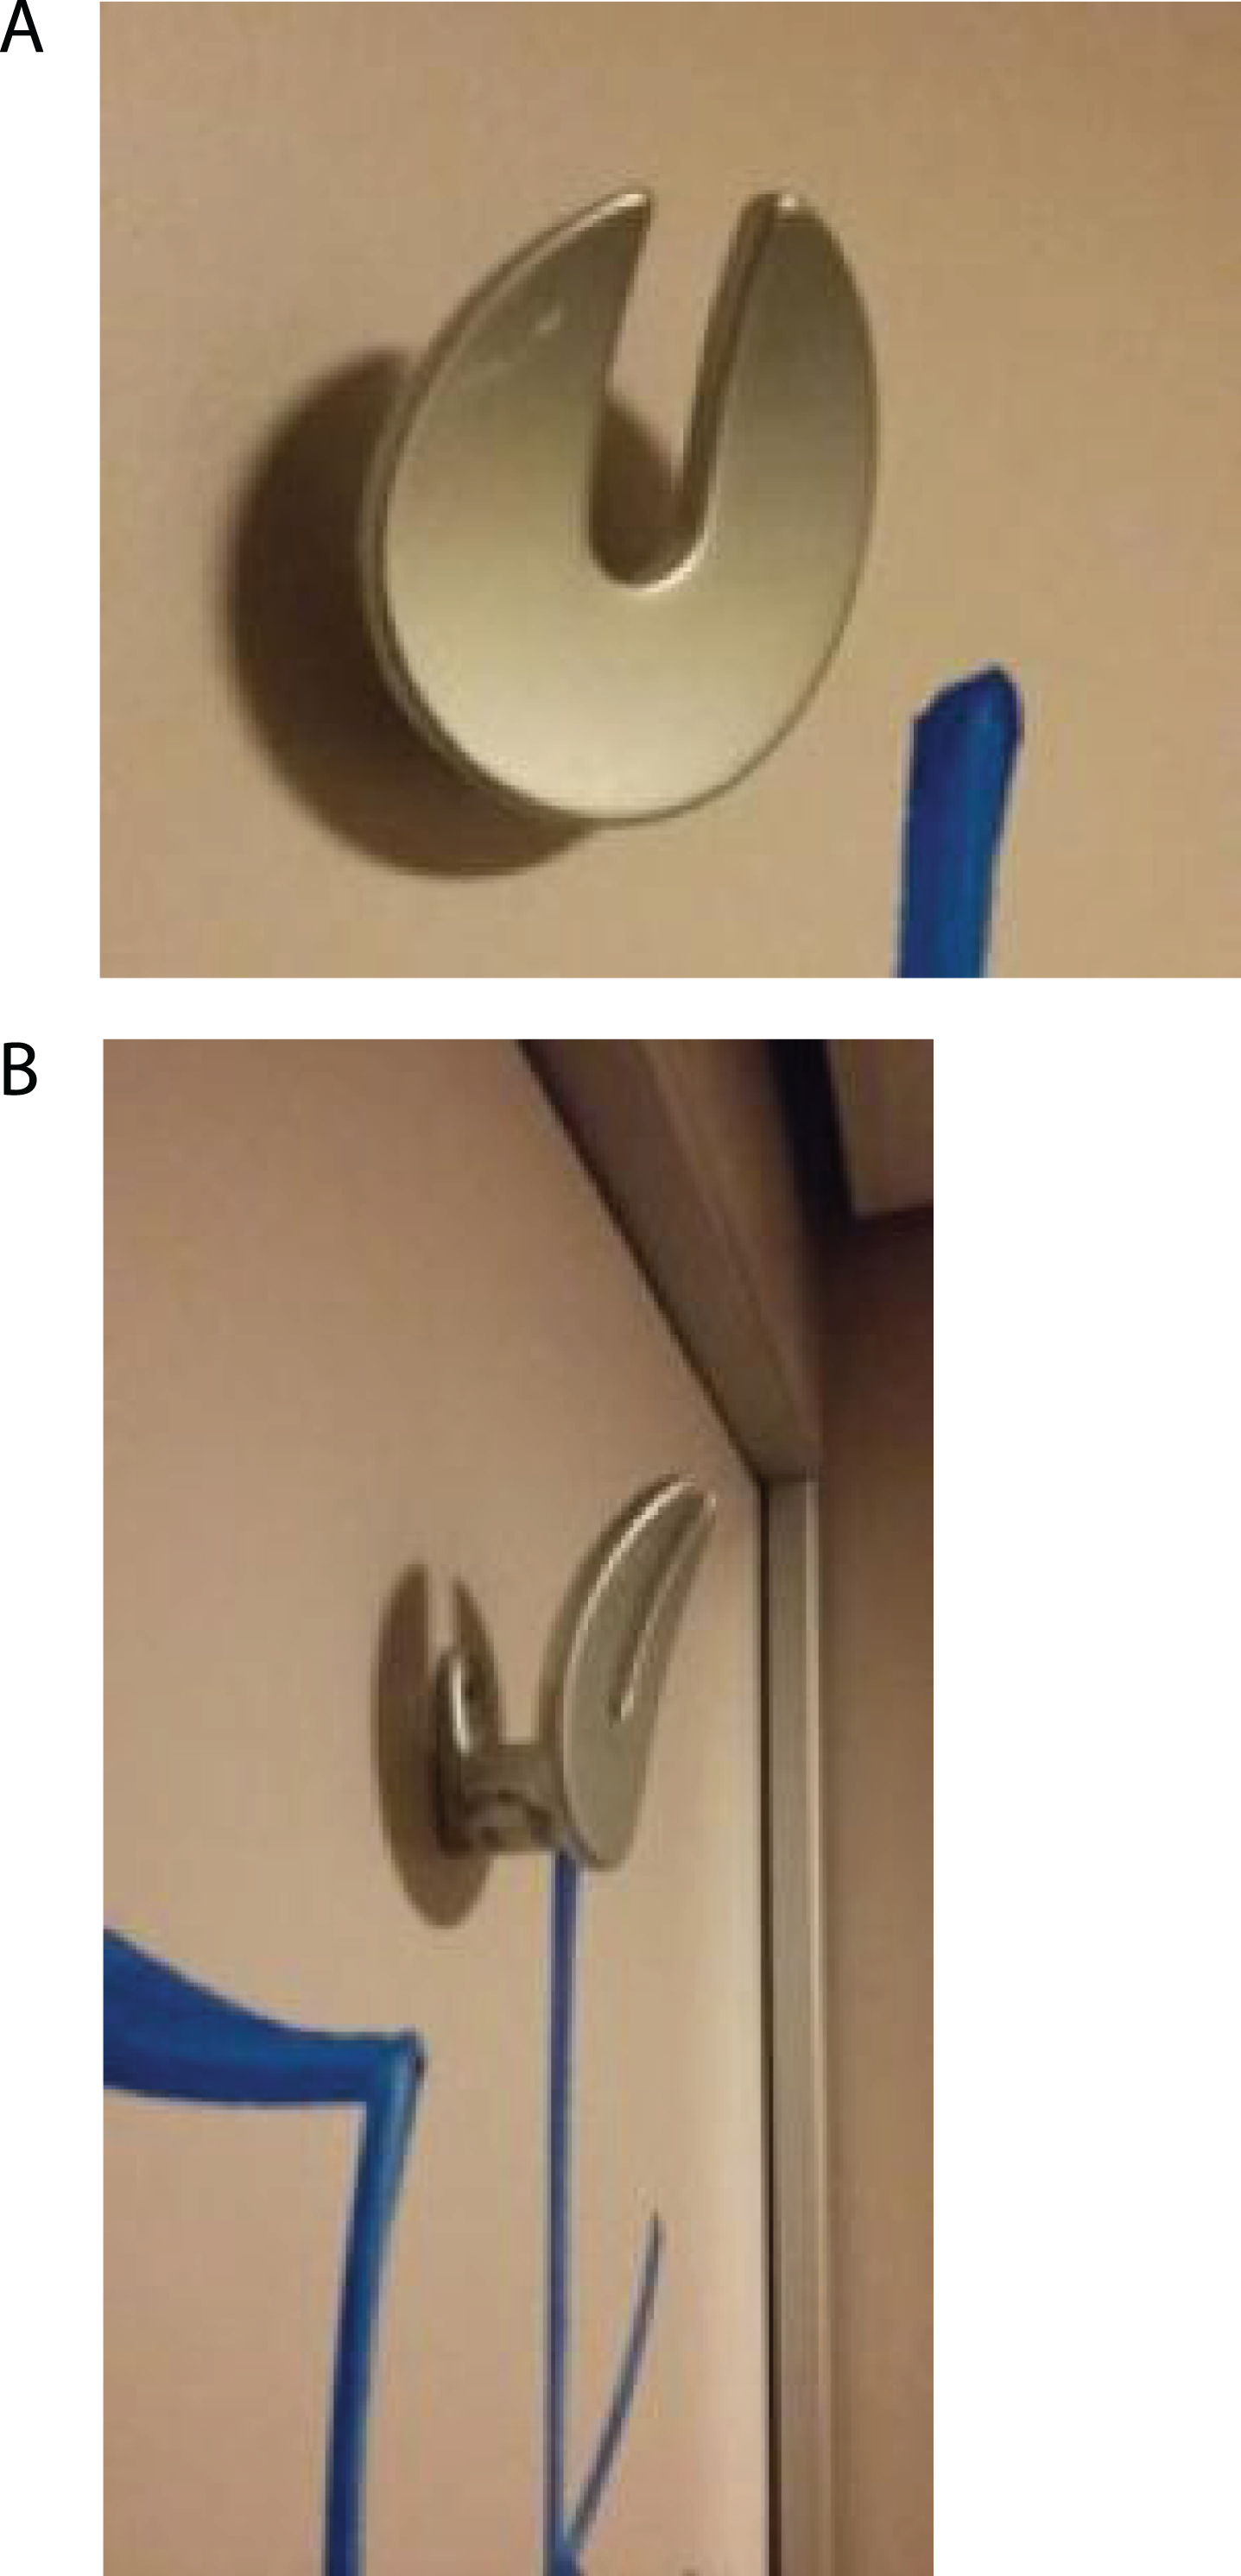 (A, B) Current hook in the train toilet.